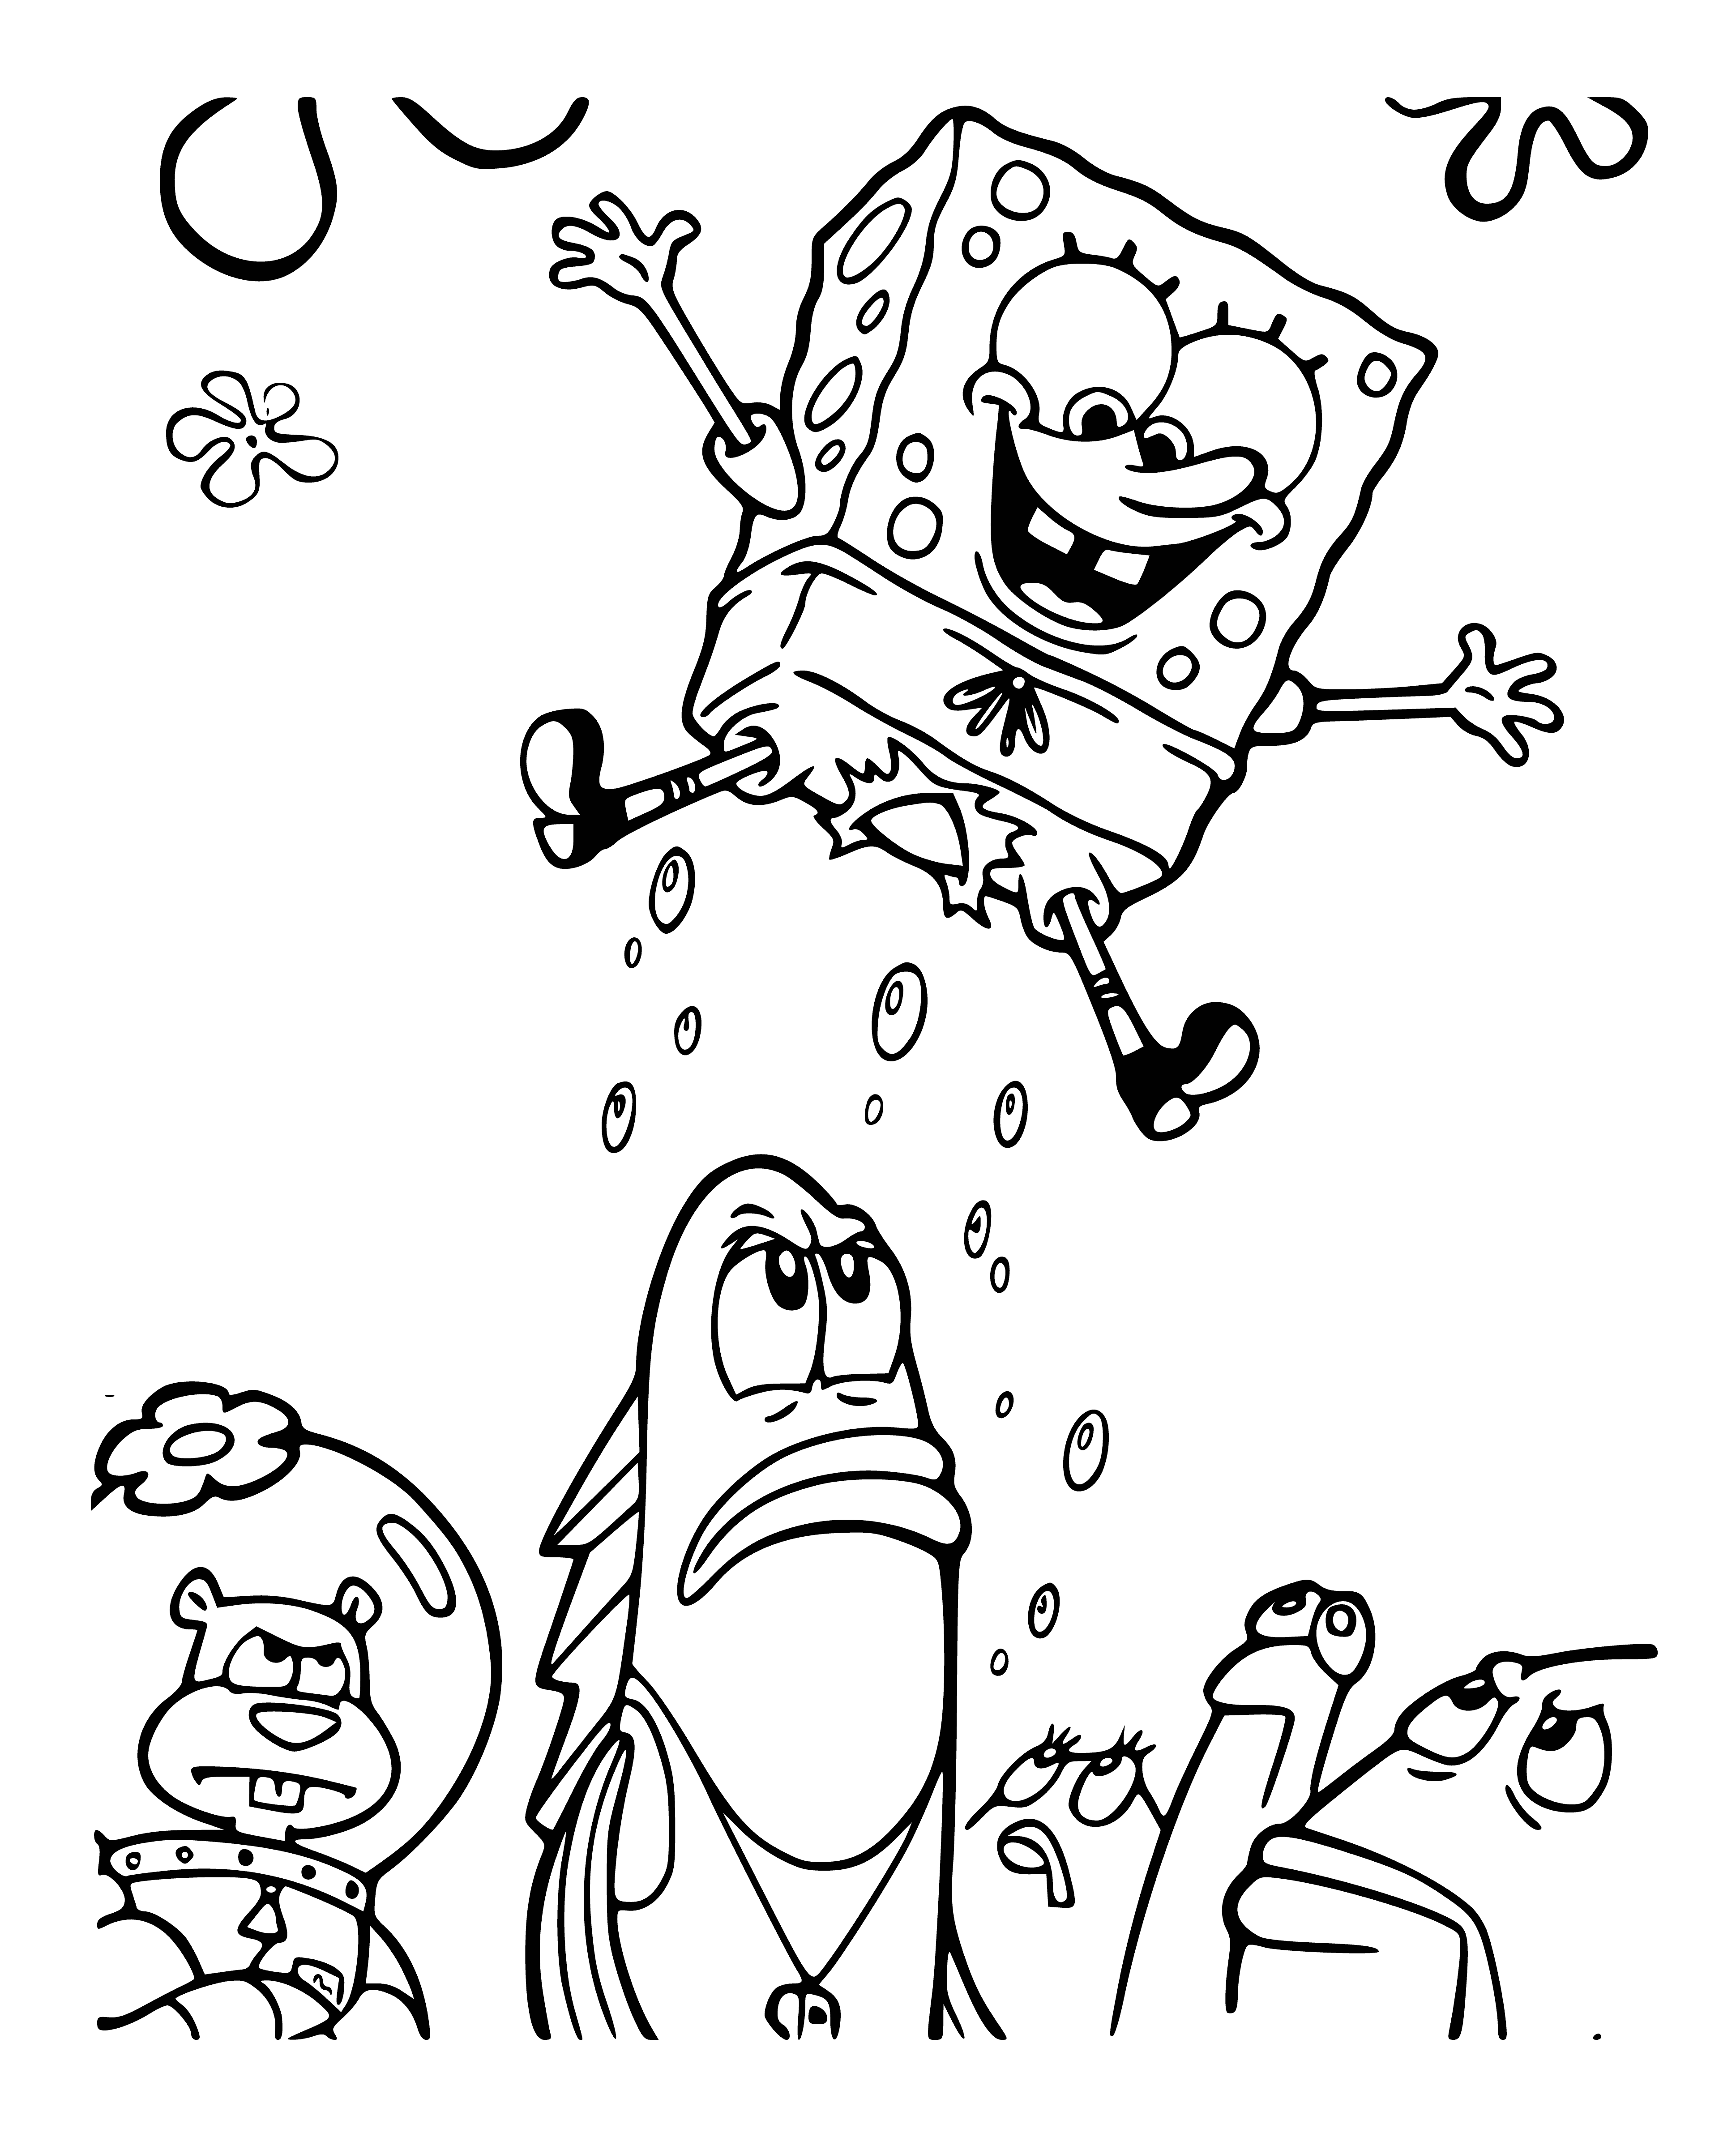 coloring page: SpongeBob rides a rocket on an orange starry background, holding onto some ropes.